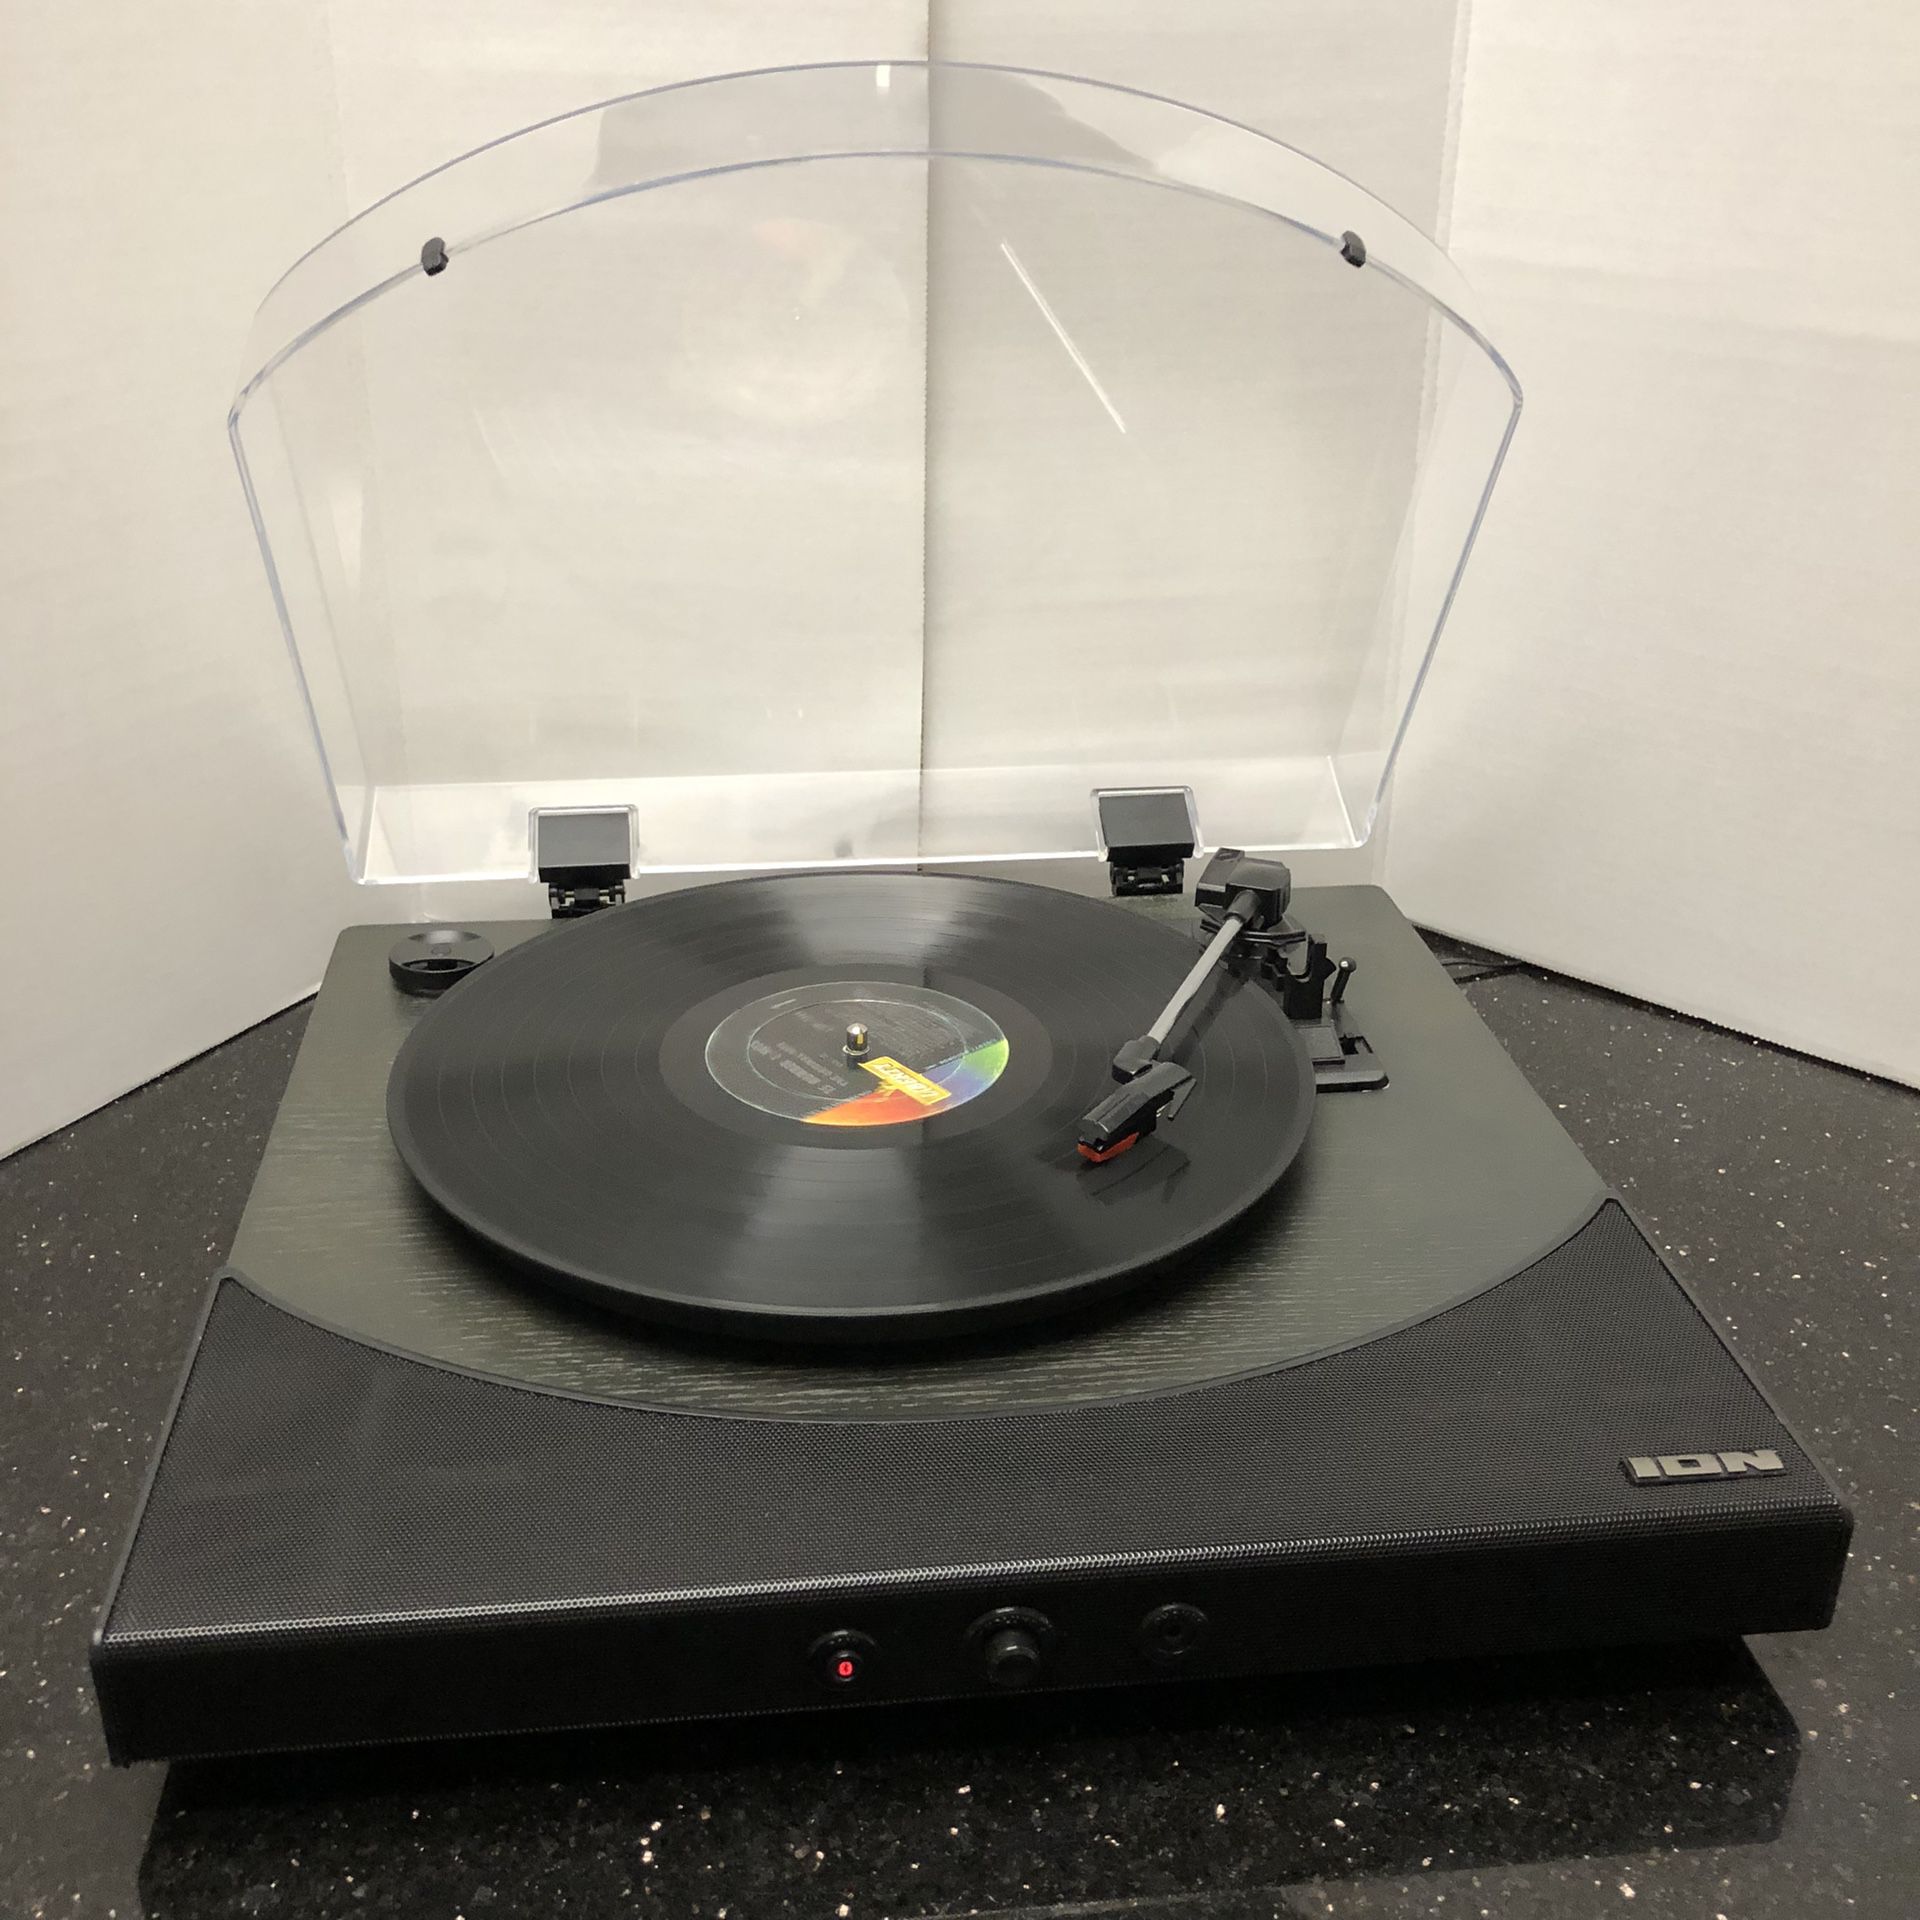 Ion Premier LP Bluetooth Turntable Record Vinyl Player with Built-in Stereo Soundbar. Excellent working condition! Ready To Play, No Need For Receiver